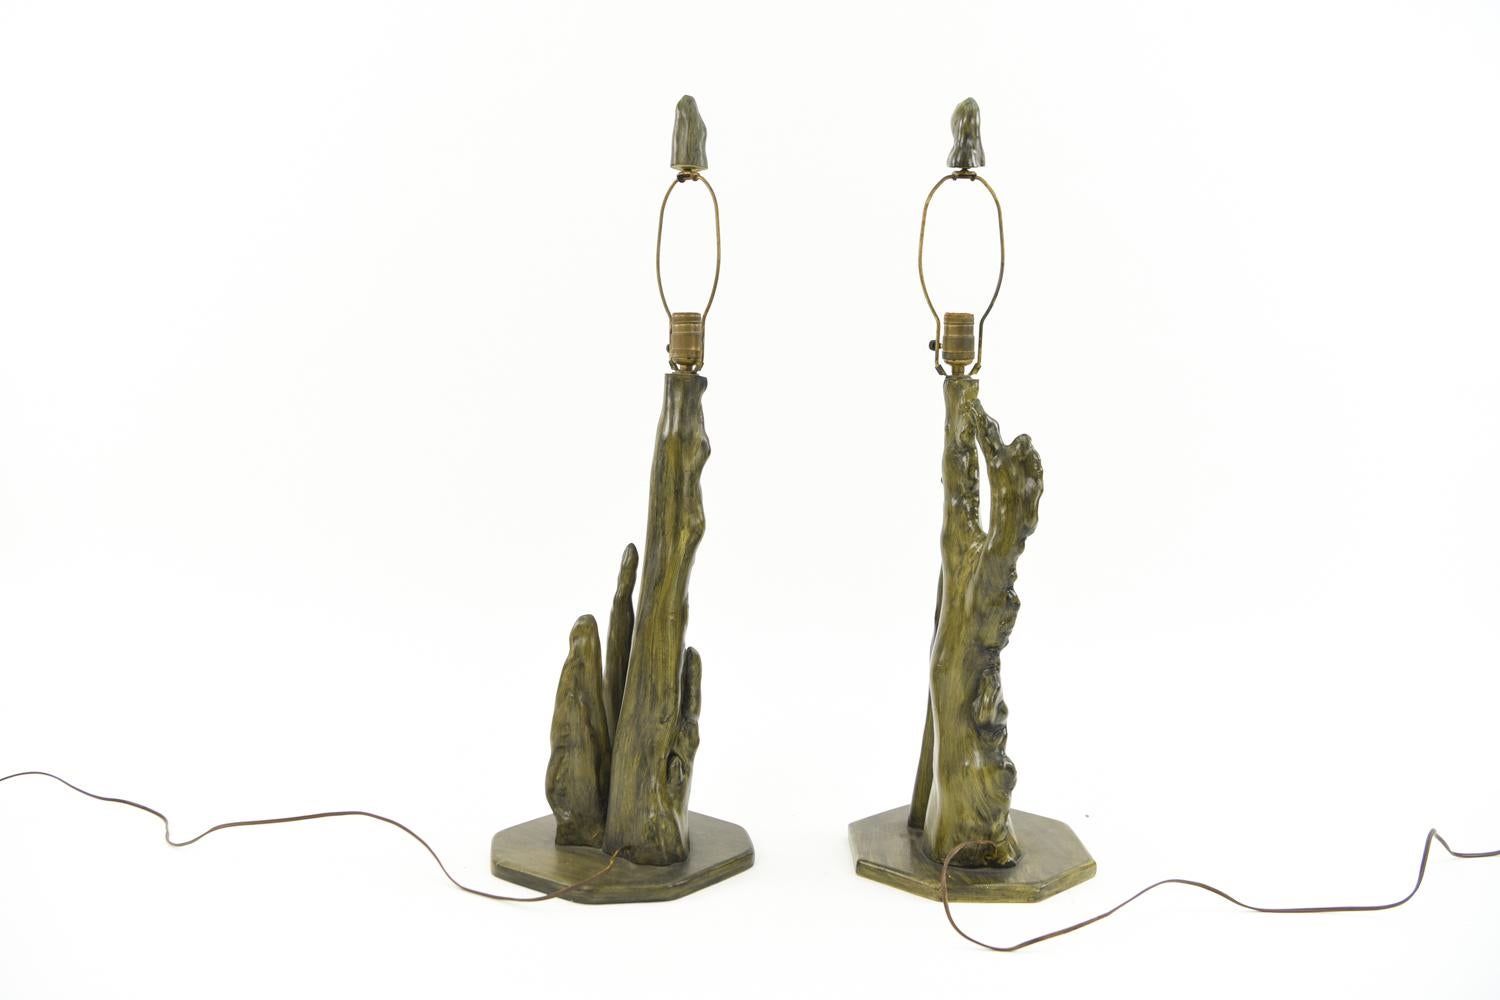 Mid-late 20th century, apparently unmarked. These lamps feature earthy green paint and original matching finials. They would make a unique, naturalistic addition to any decor!